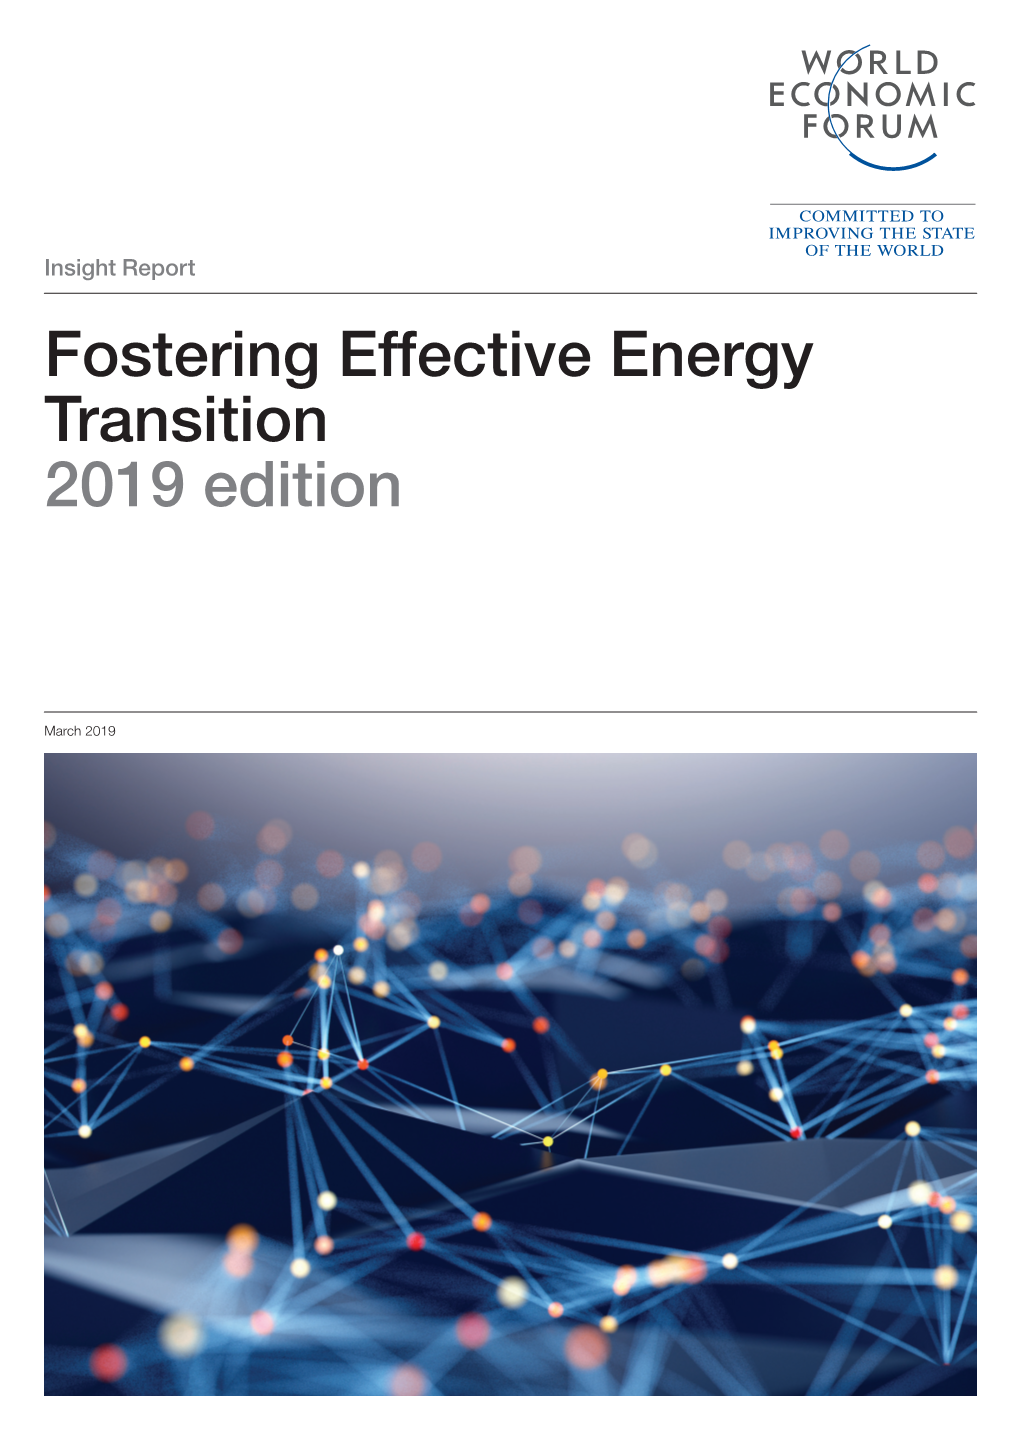 Fostering Effective Energy Transition 2019 Edition